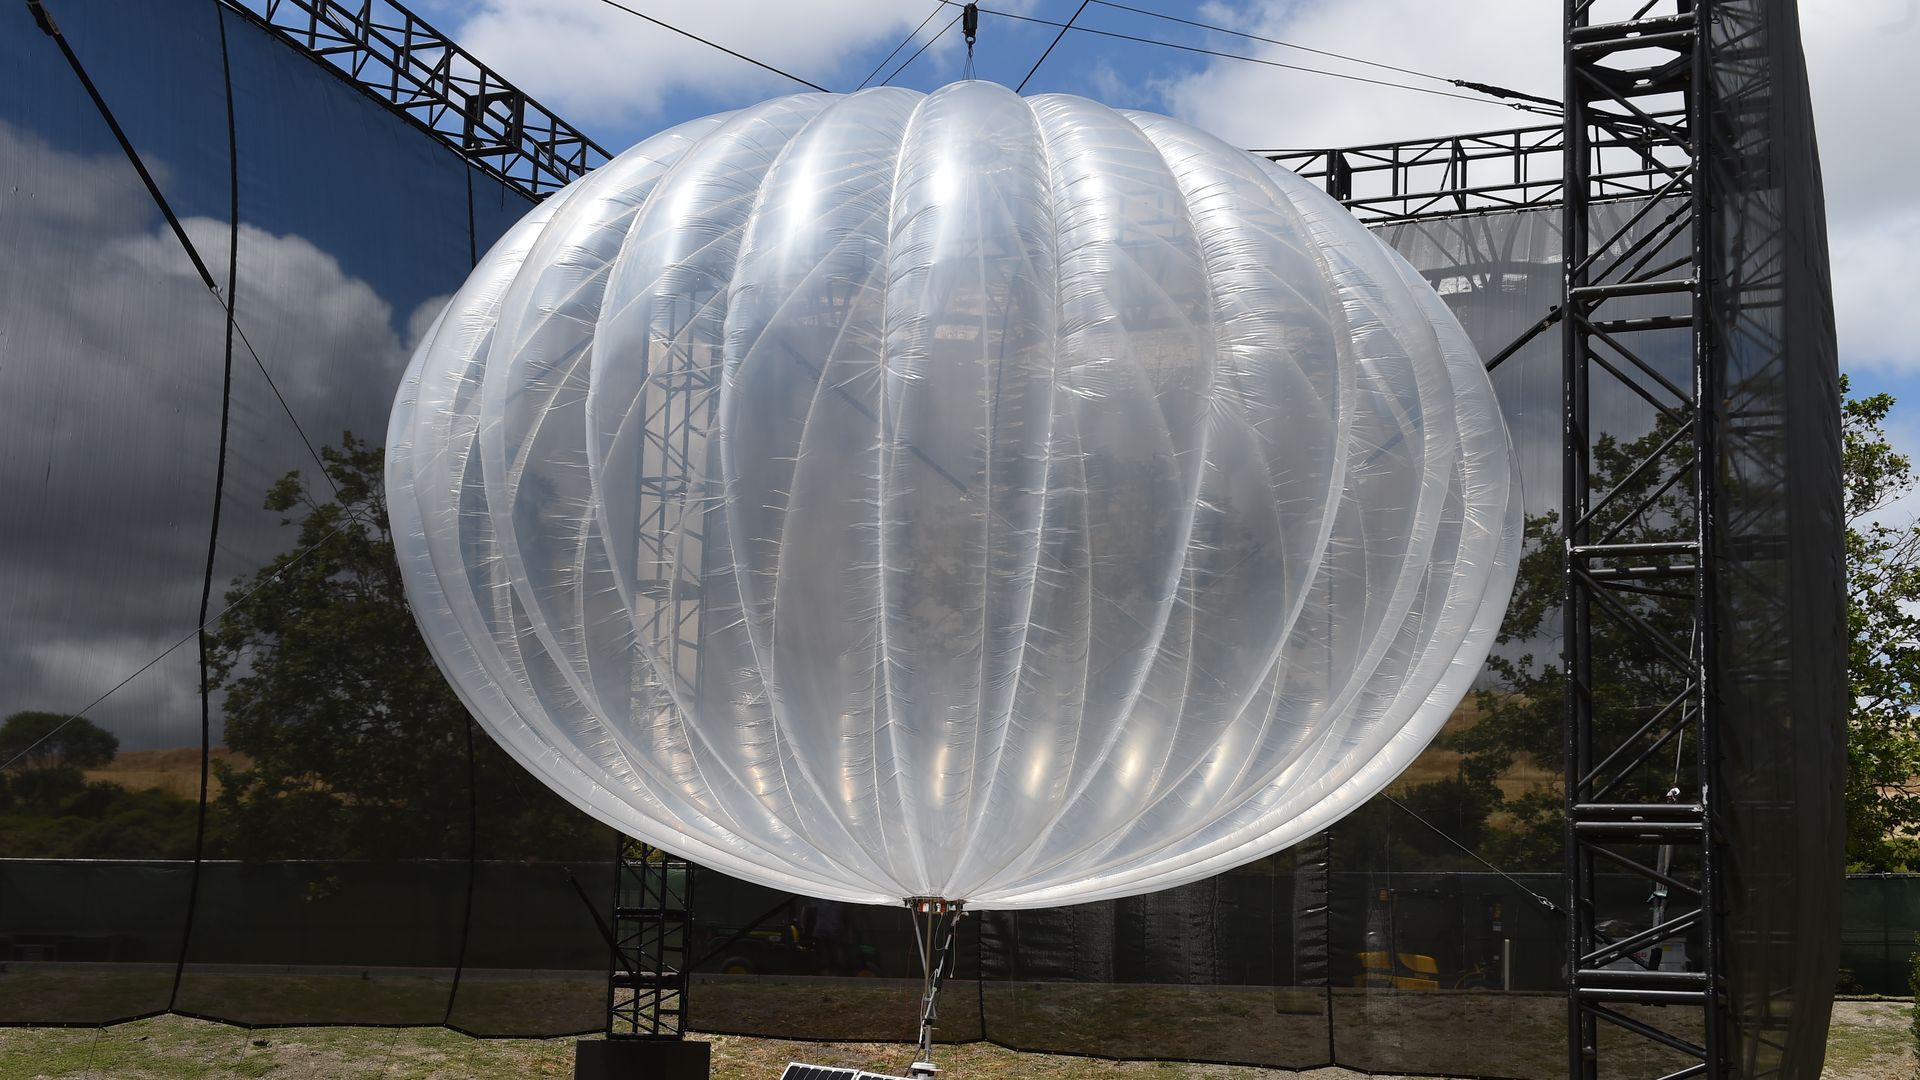 This image shows a large clear balloon from the Loon project.